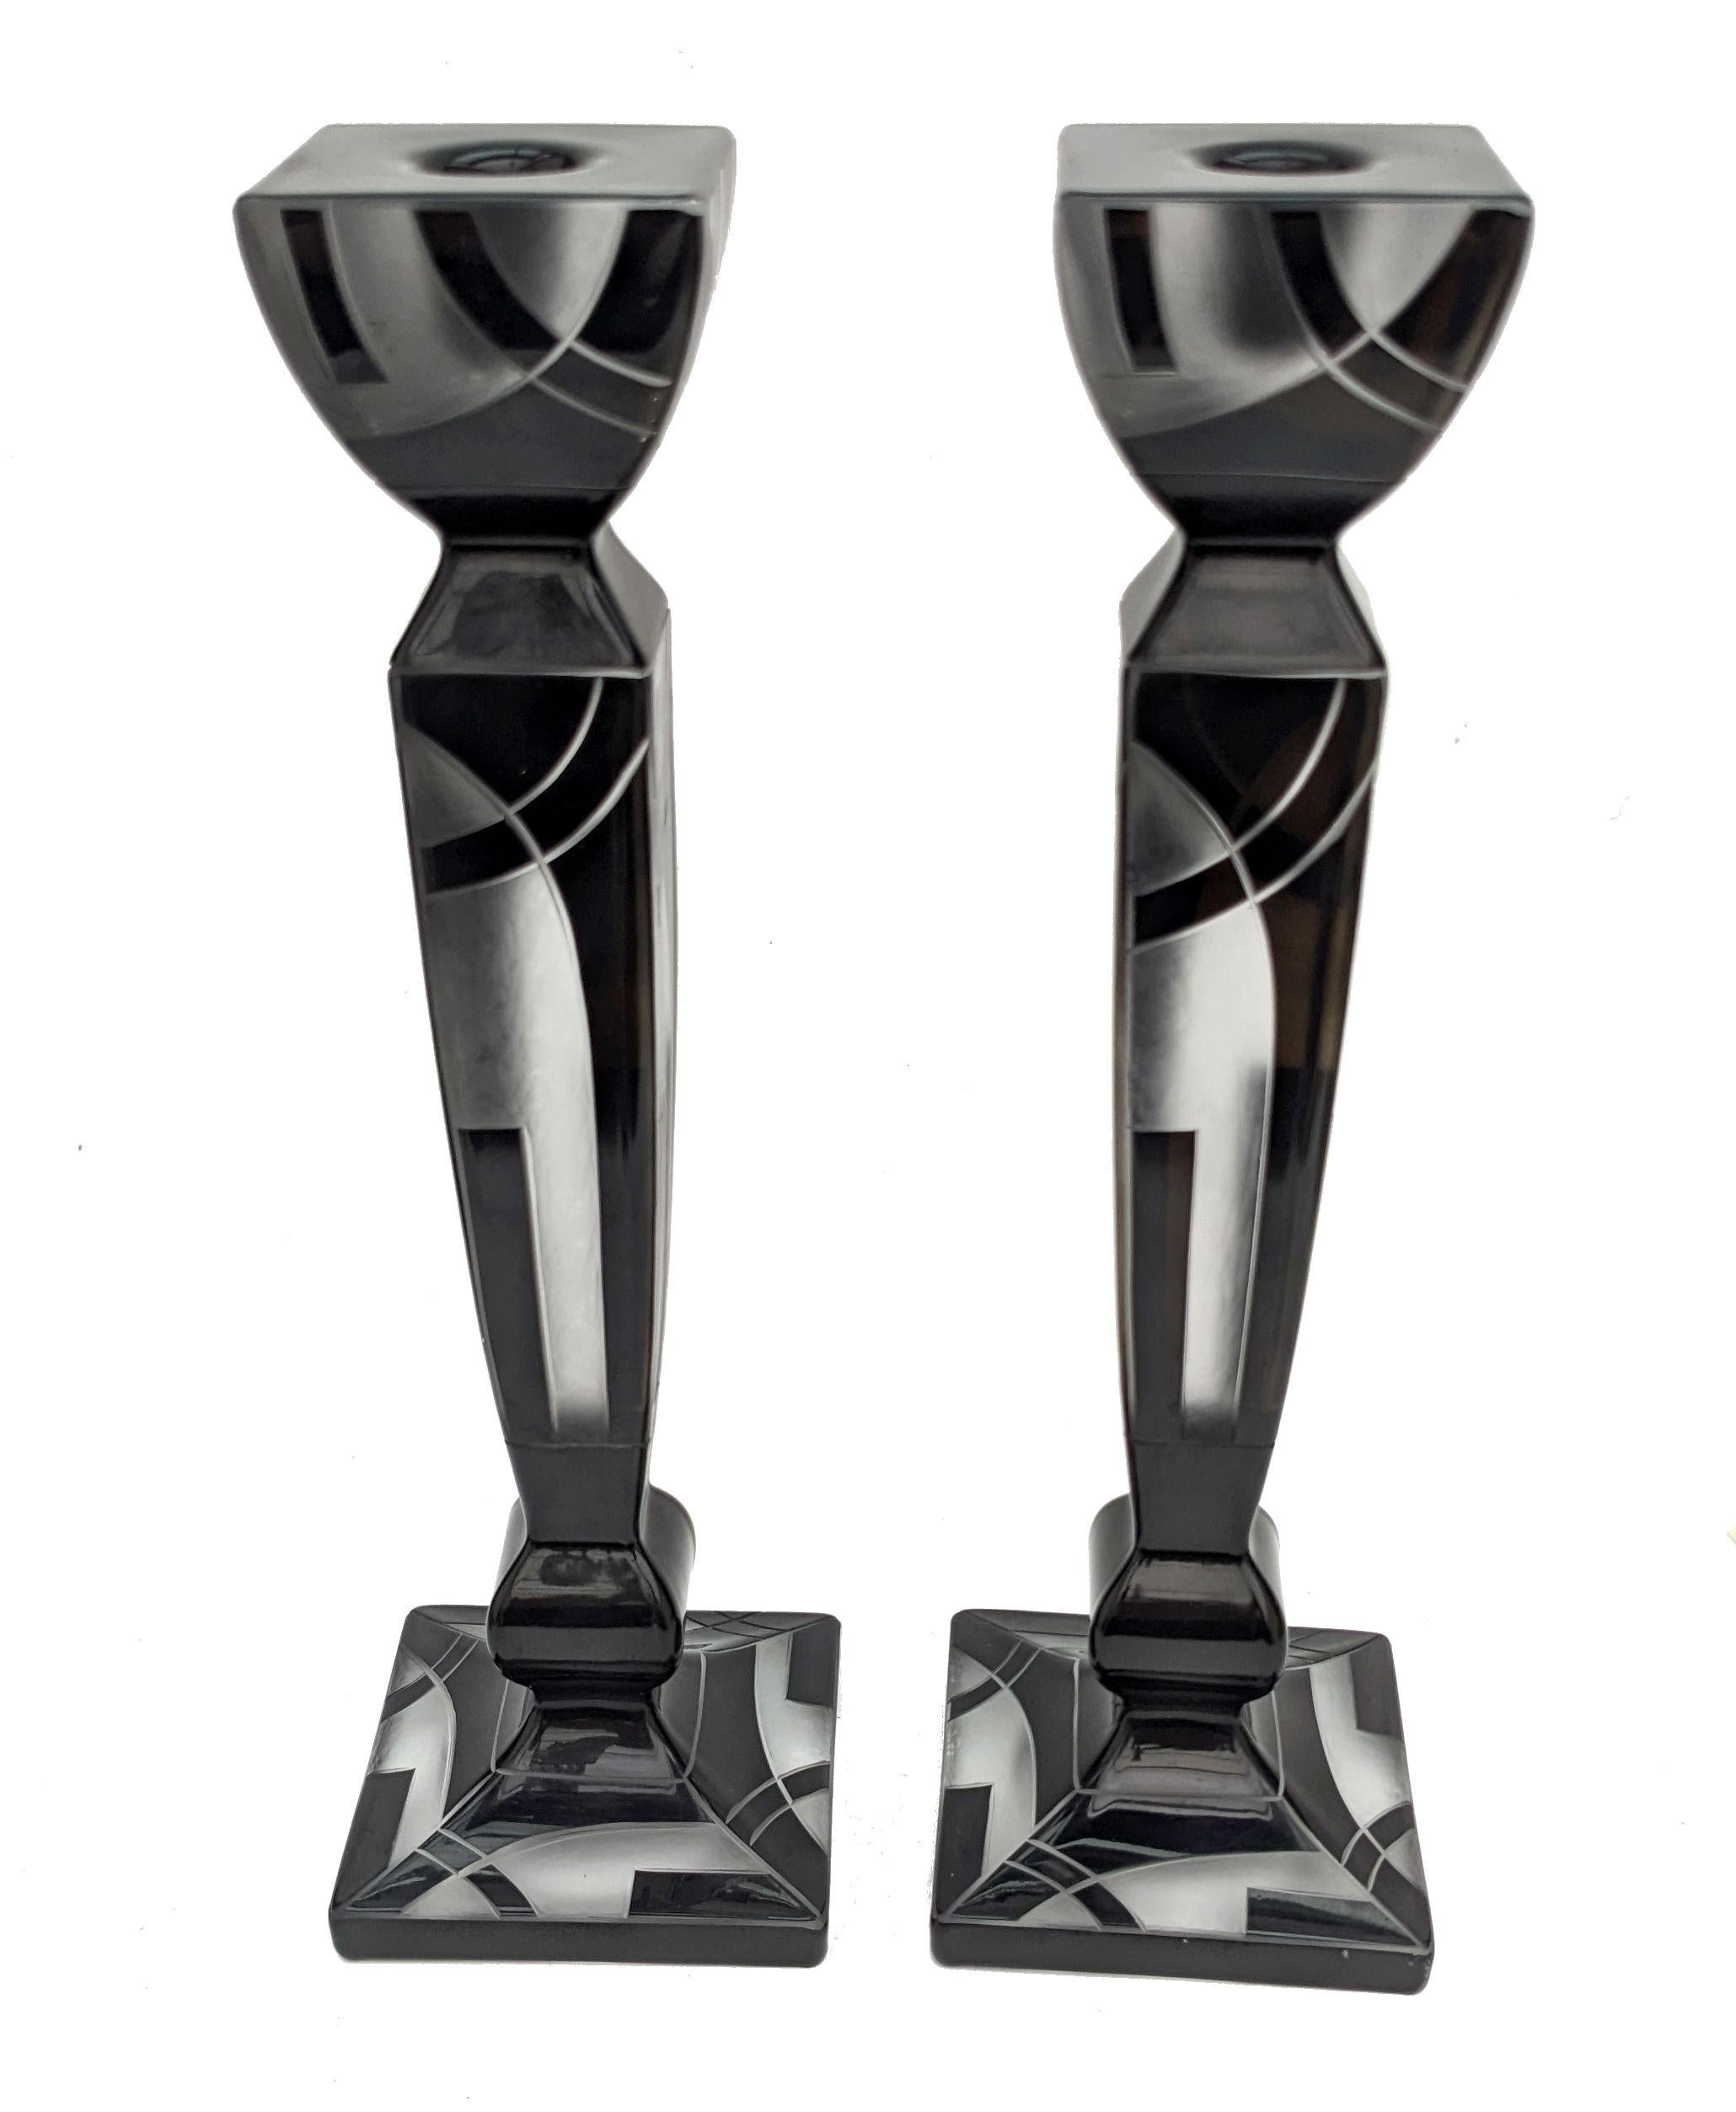 Art Deco Huge Matching Pair Of Spectacular Czech Glass Candlesticks, c1930 In Good Condition For Sale In Devon, England